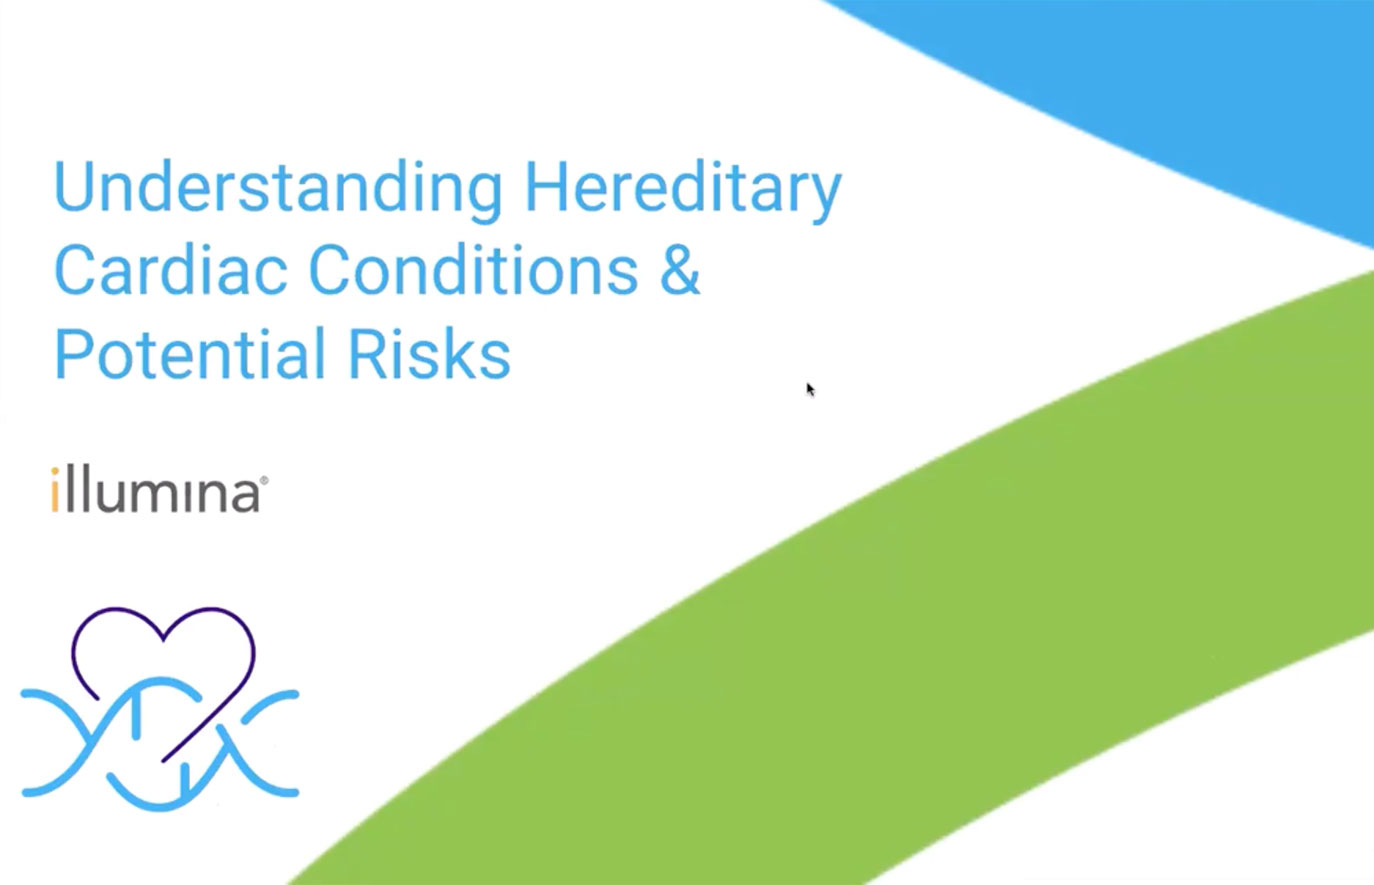 Understanding Hereditary Cardiac Conditions & Potential Risks